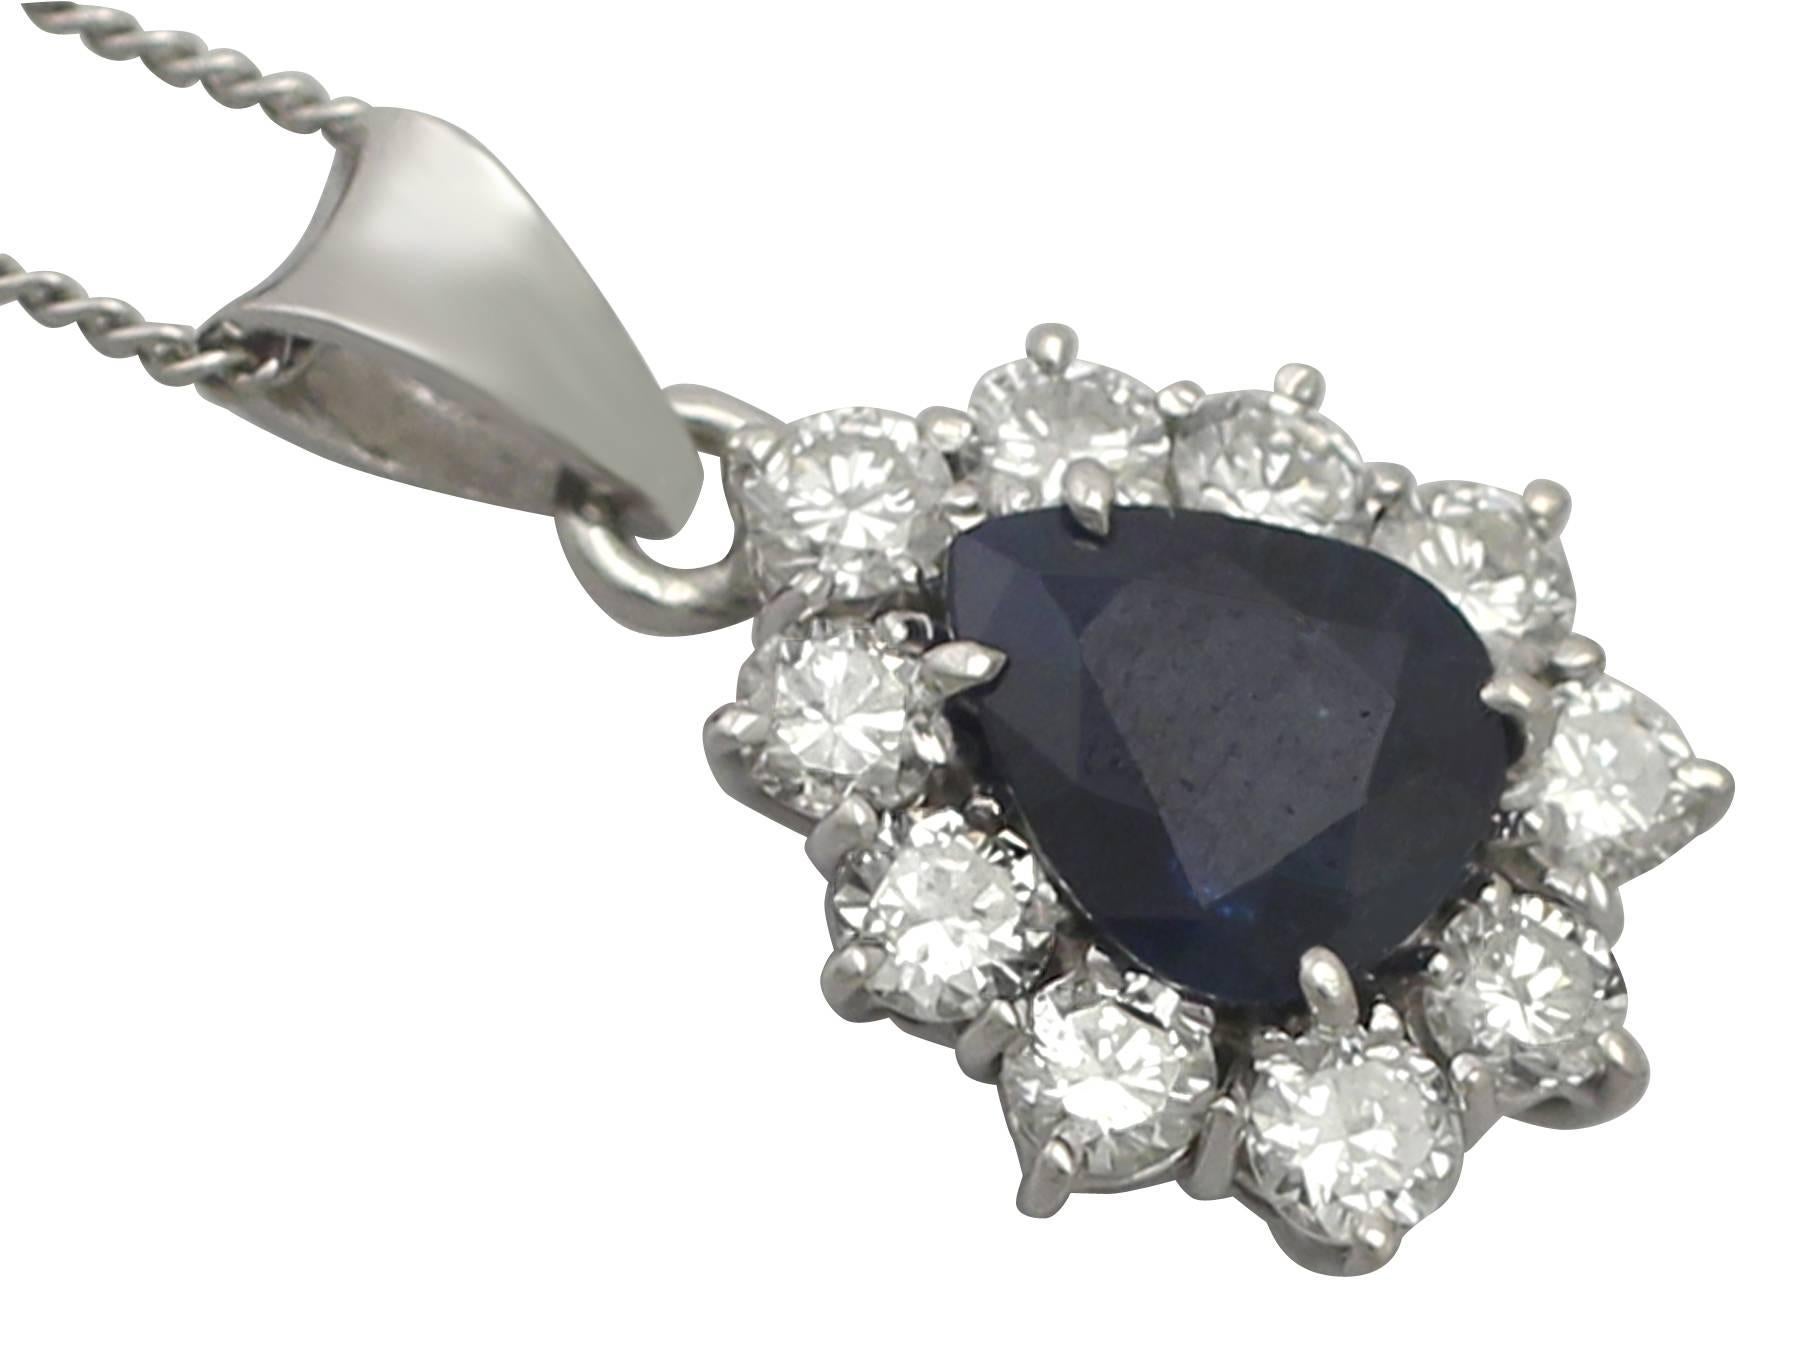 A fine and impressive 1.25 carat blue sapphire and 0.50 carat diamond, 14 karat white gold pendant; part of our diverse vintage jewellery and estate jewelry collections

This fine and impressive vintage sapphire pendant has been crafted in 14k white